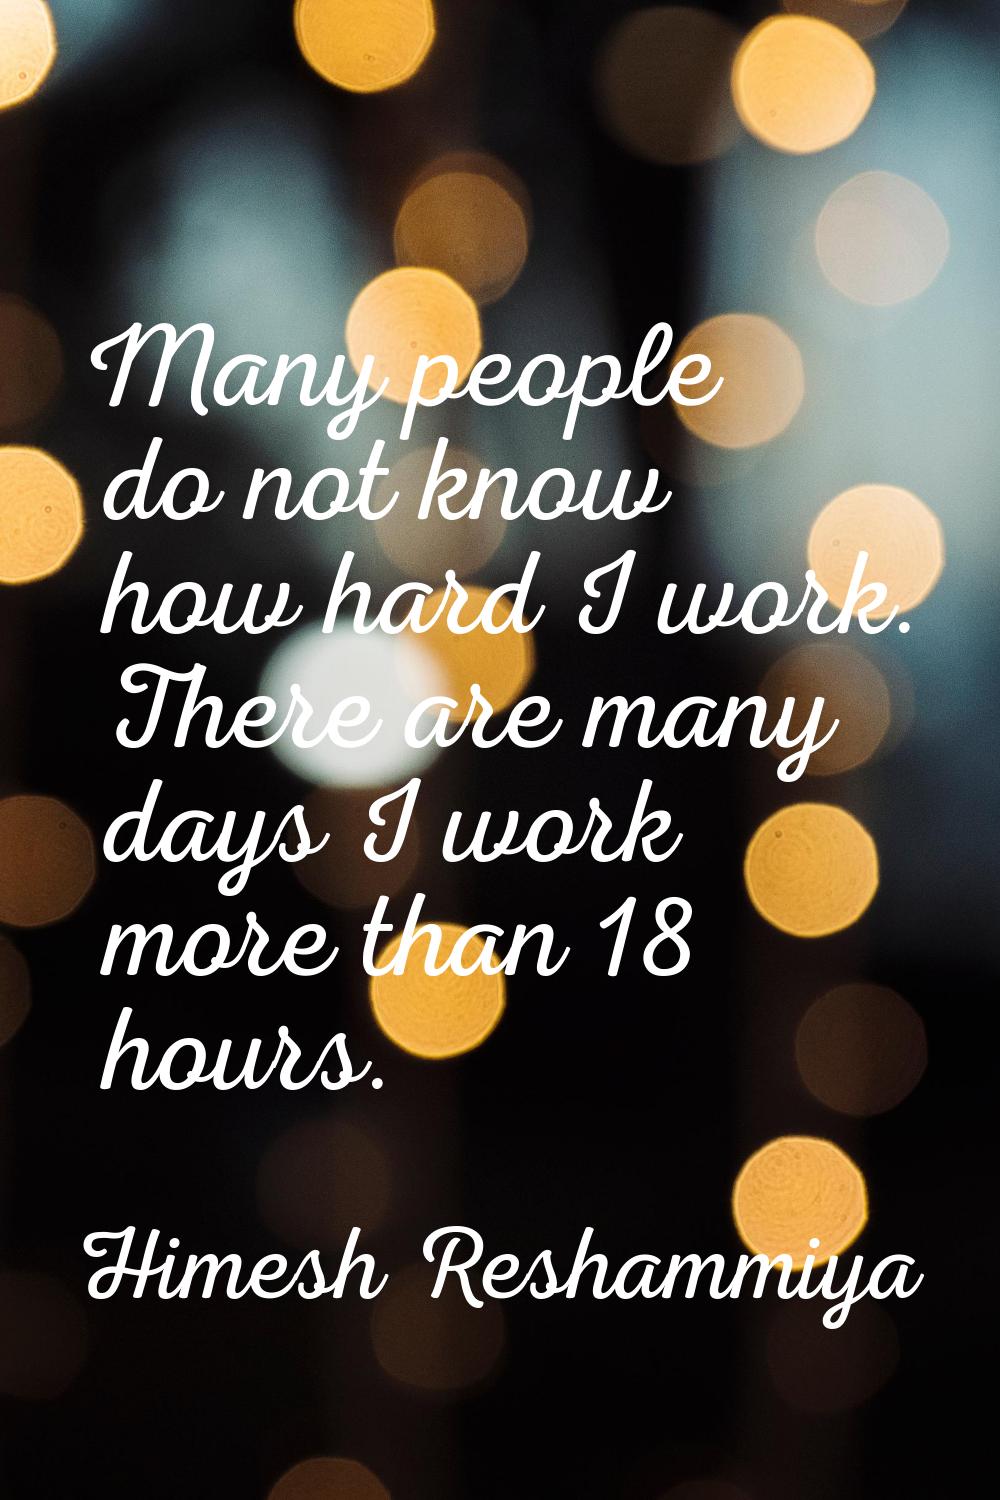 Many people do not know how hard I work. There are many days I work more than 18 hours.